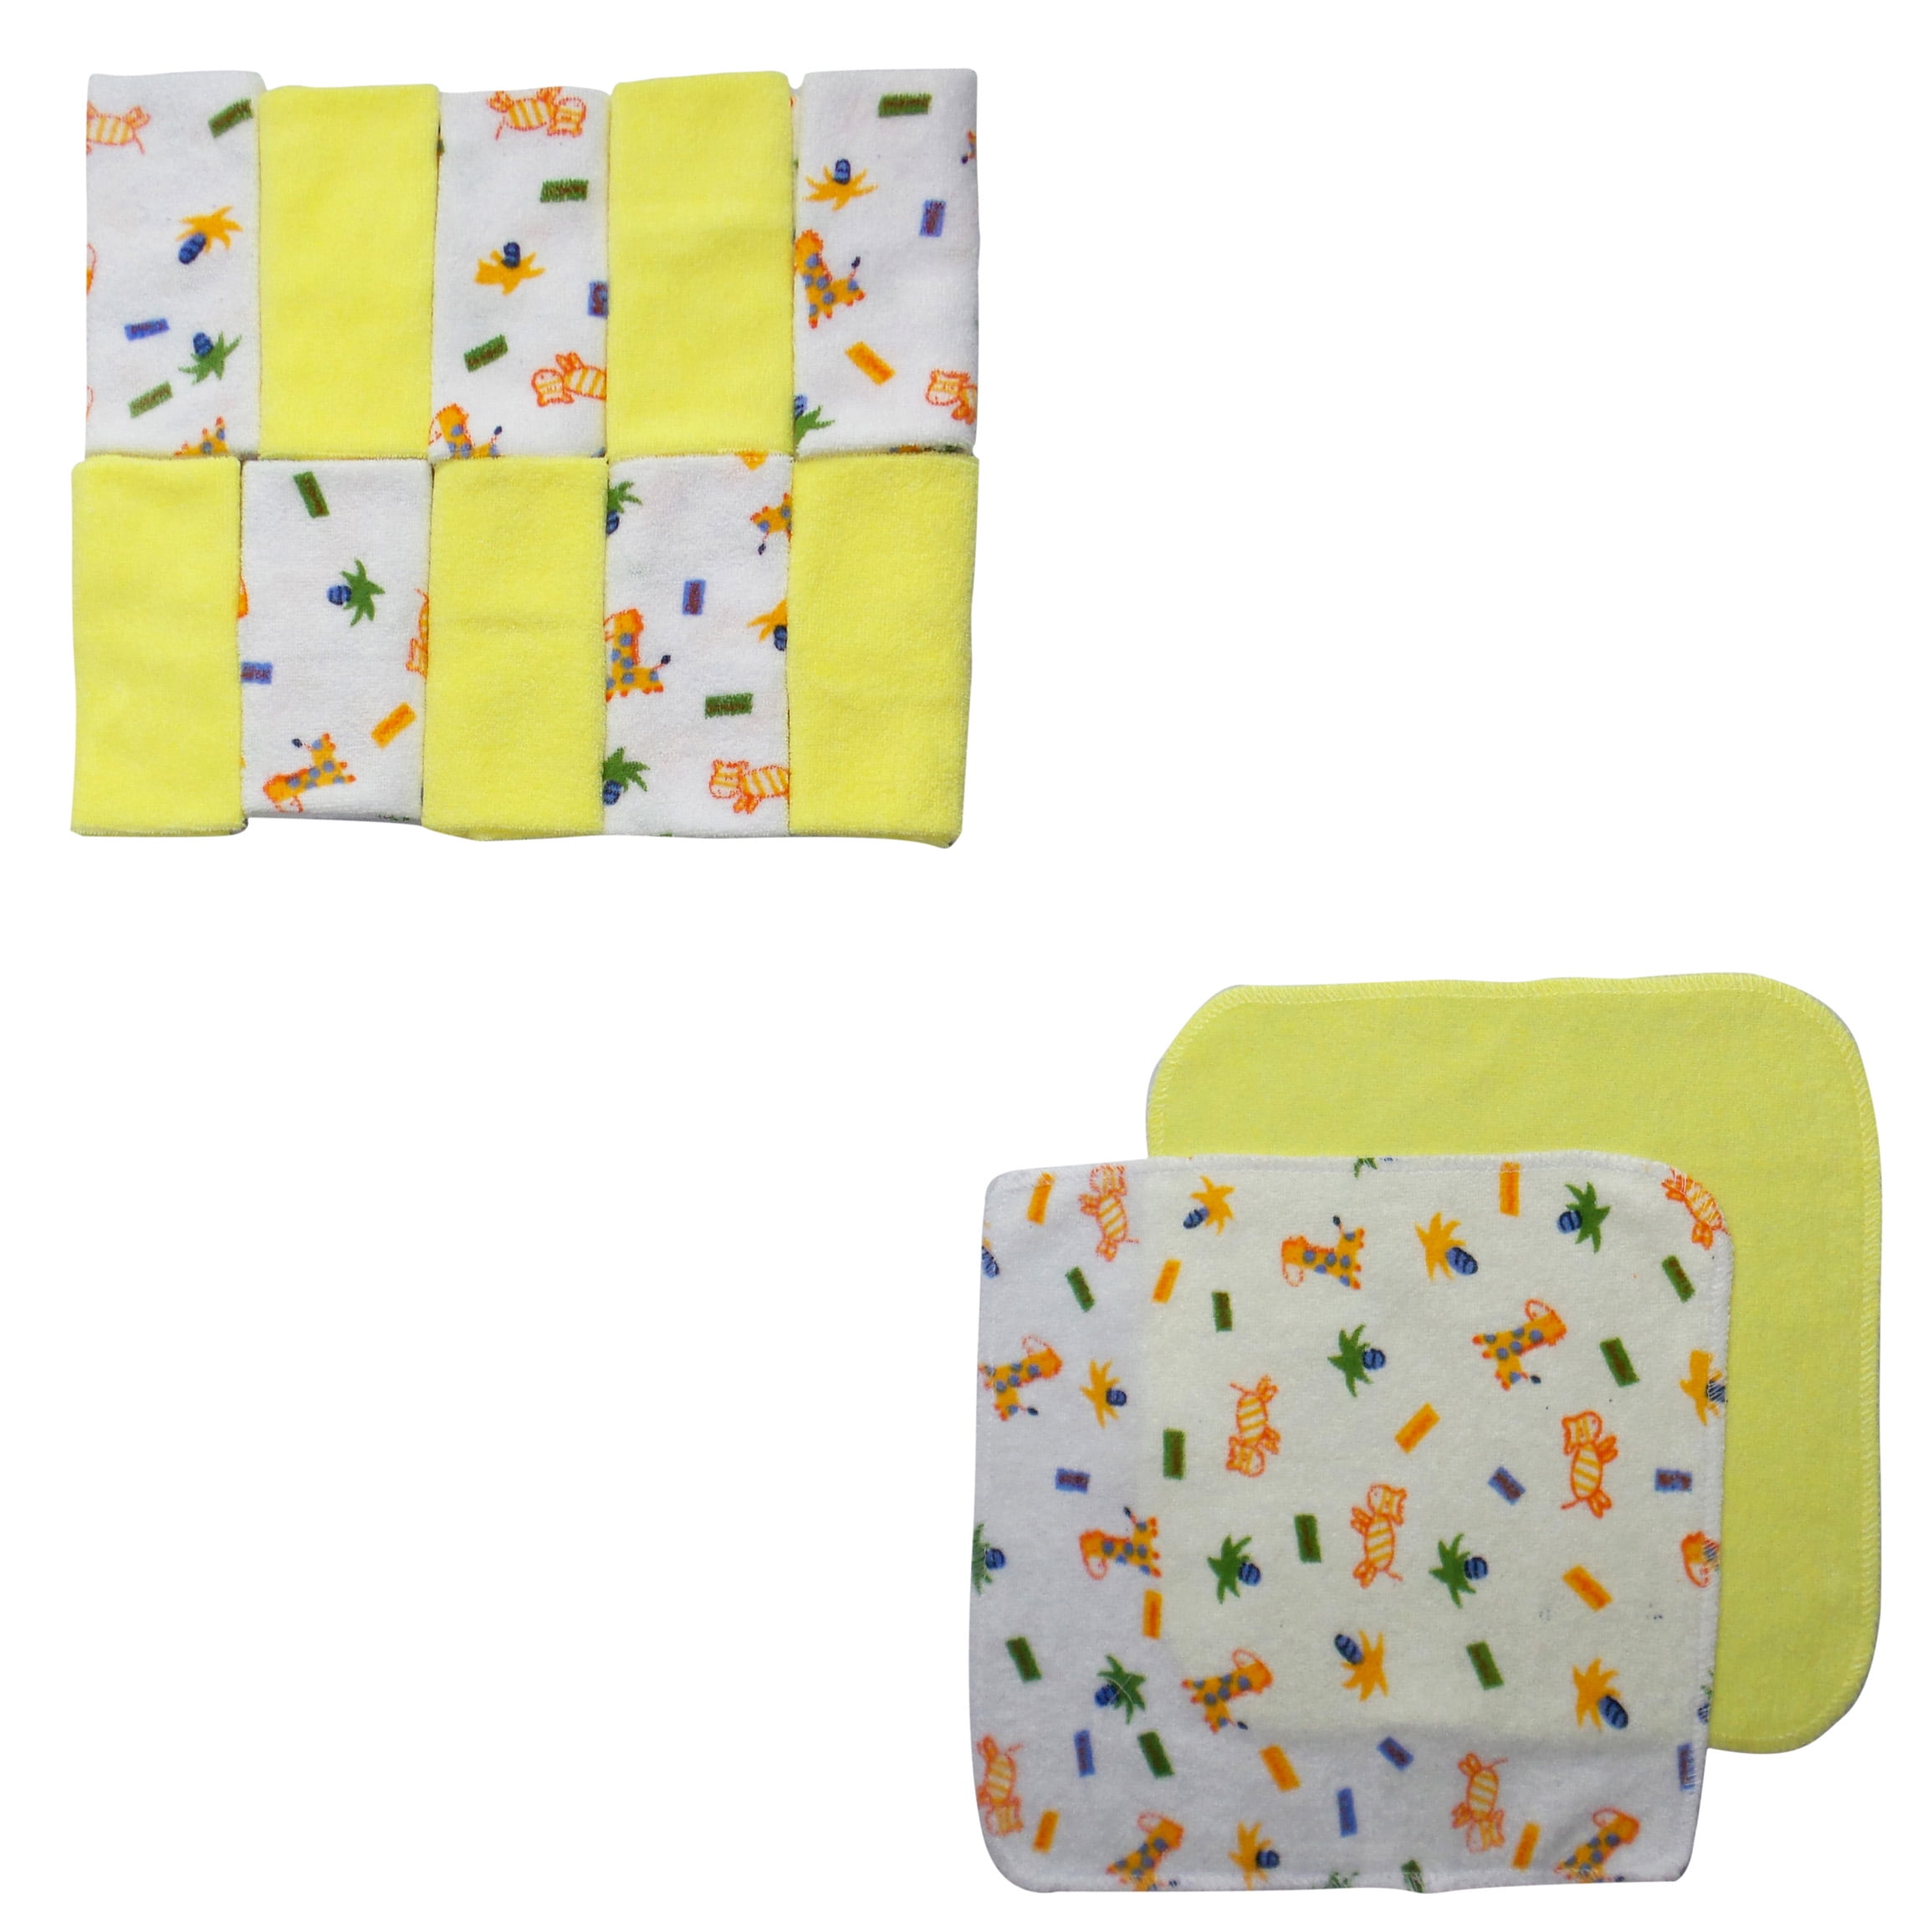 Wash Cloth Set, Yellow With Assorted Prints - 12 Piece Pack